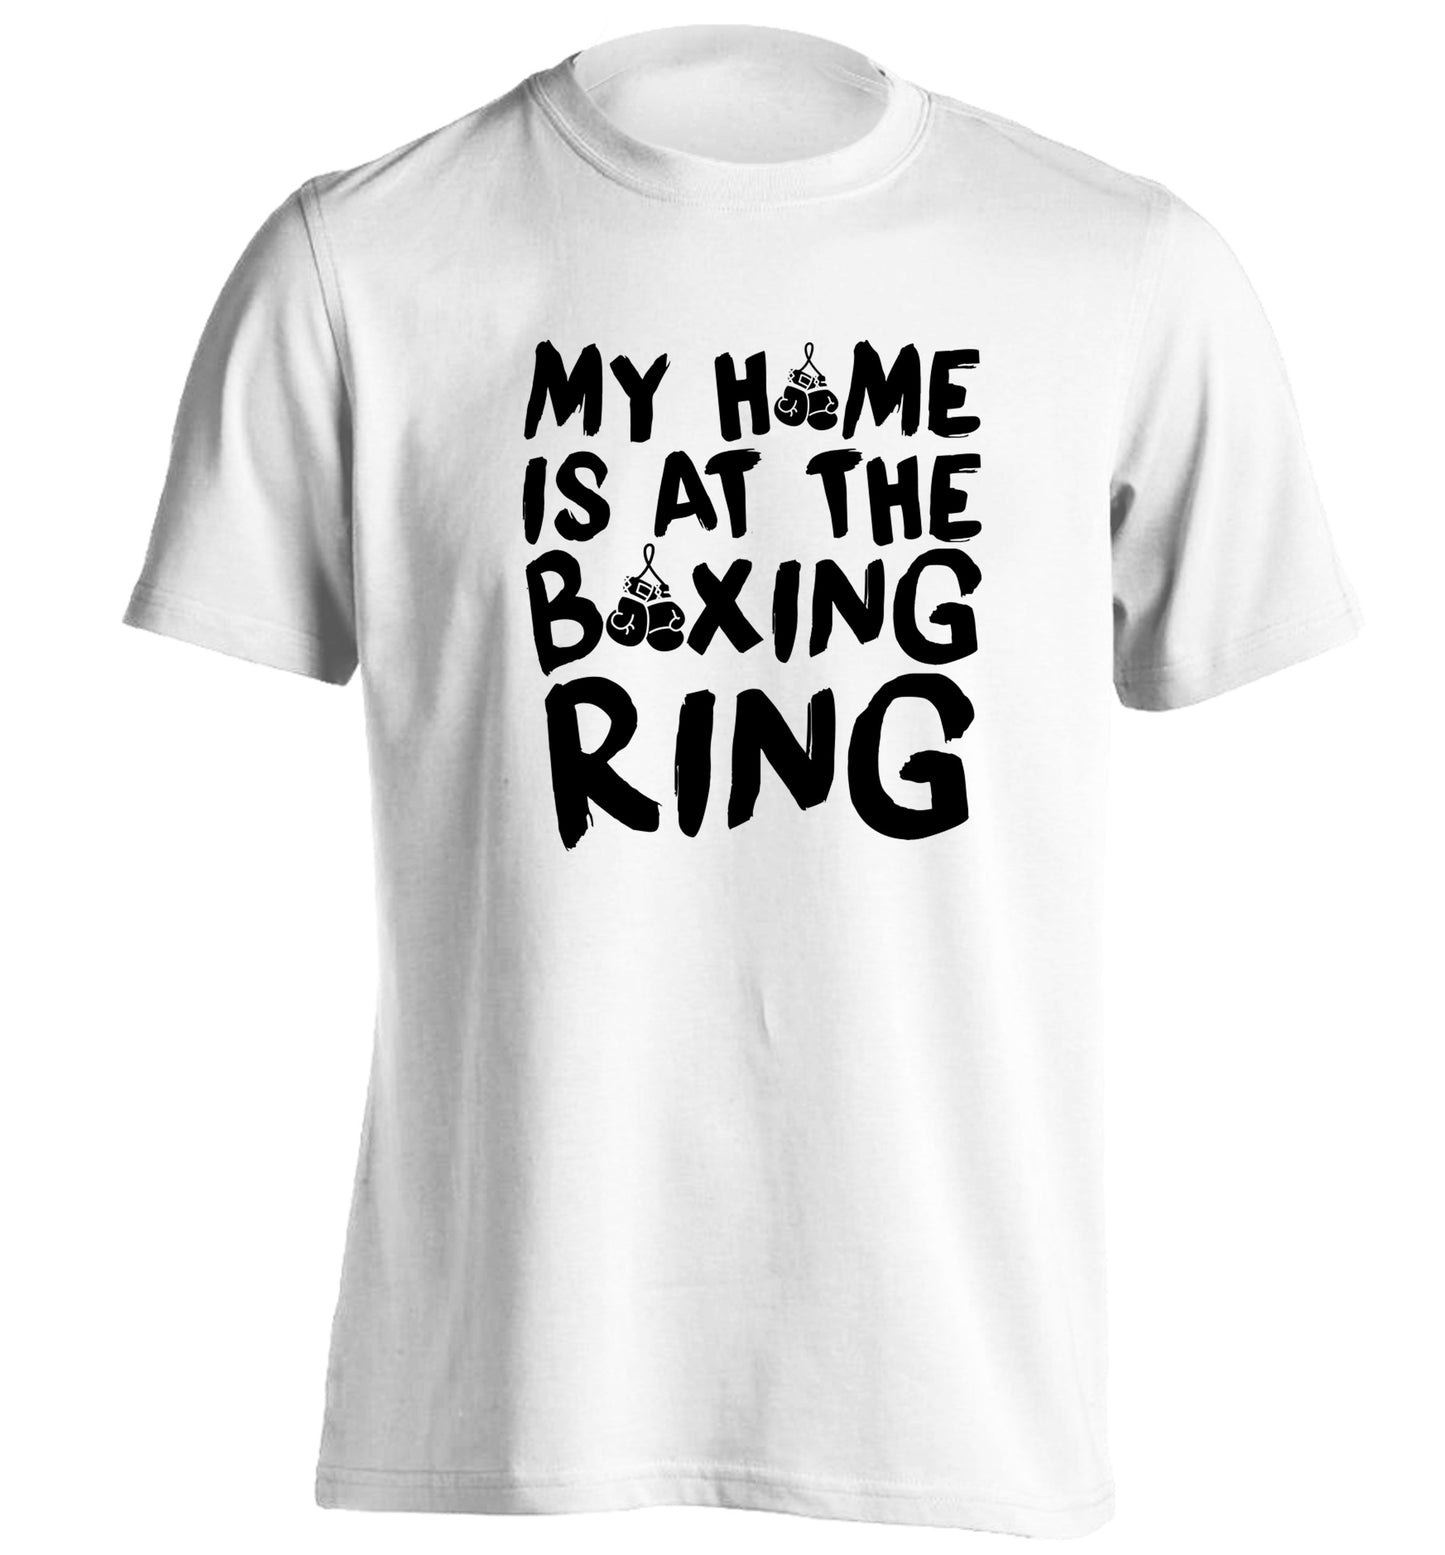 My home is at the boxing ring adults unisex white Tshirt 2XL